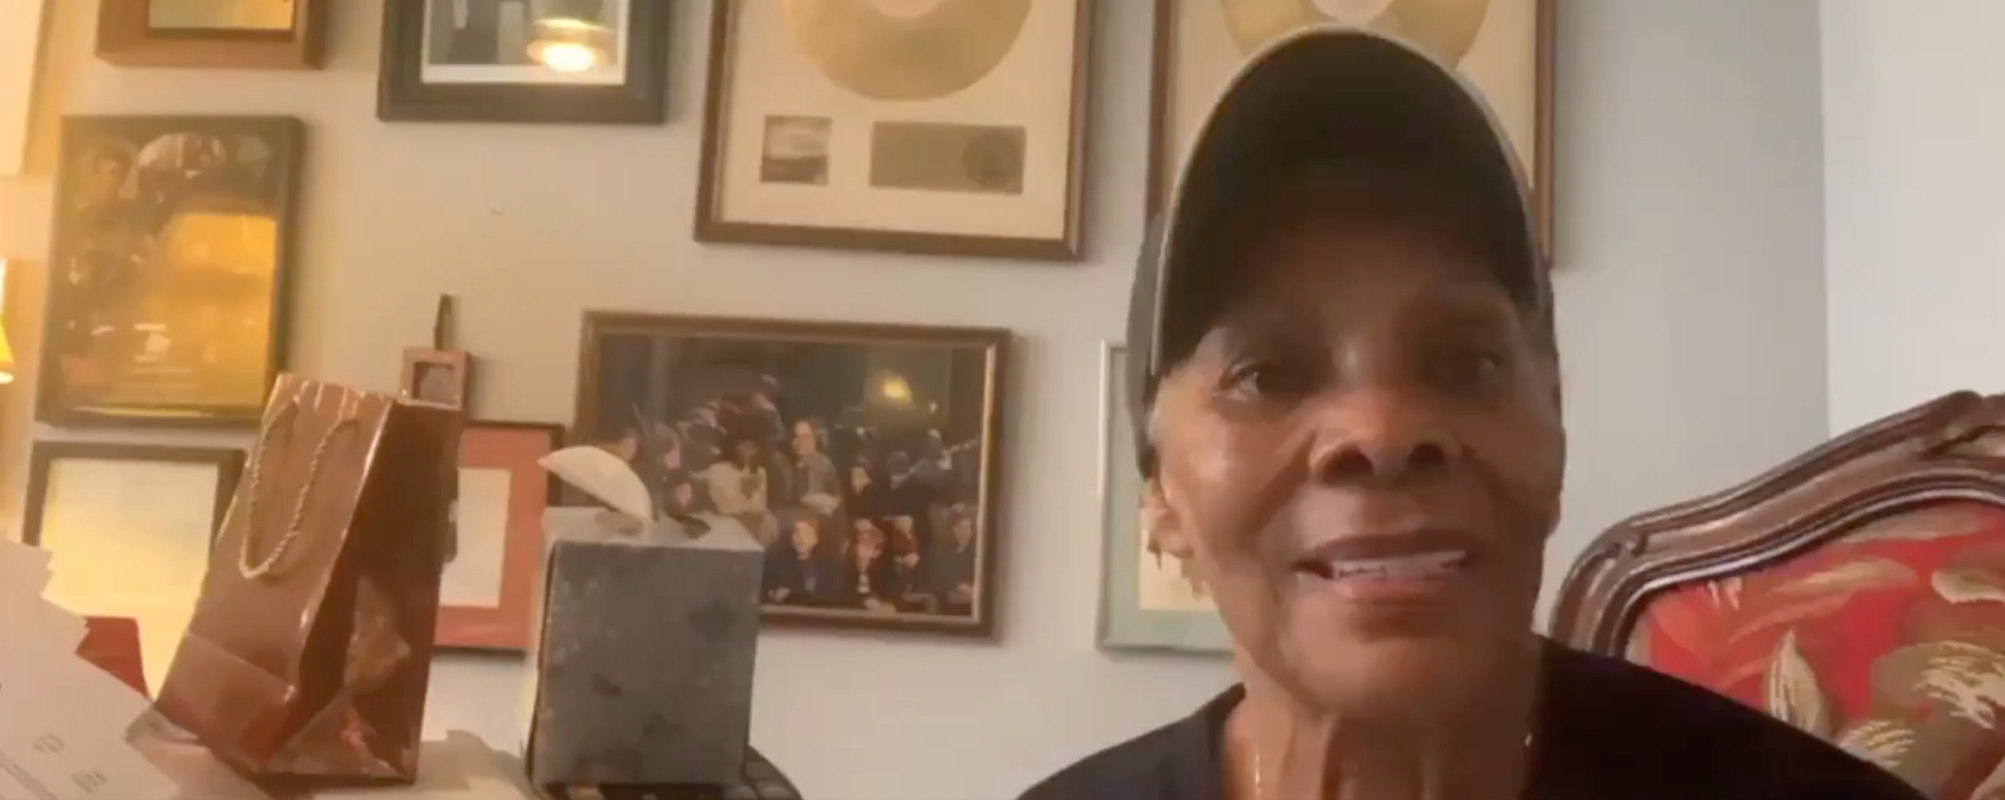 Dionne Warwick Speaks Out Against Britney Spears’ “13 Years of Bondage” Conservatorship